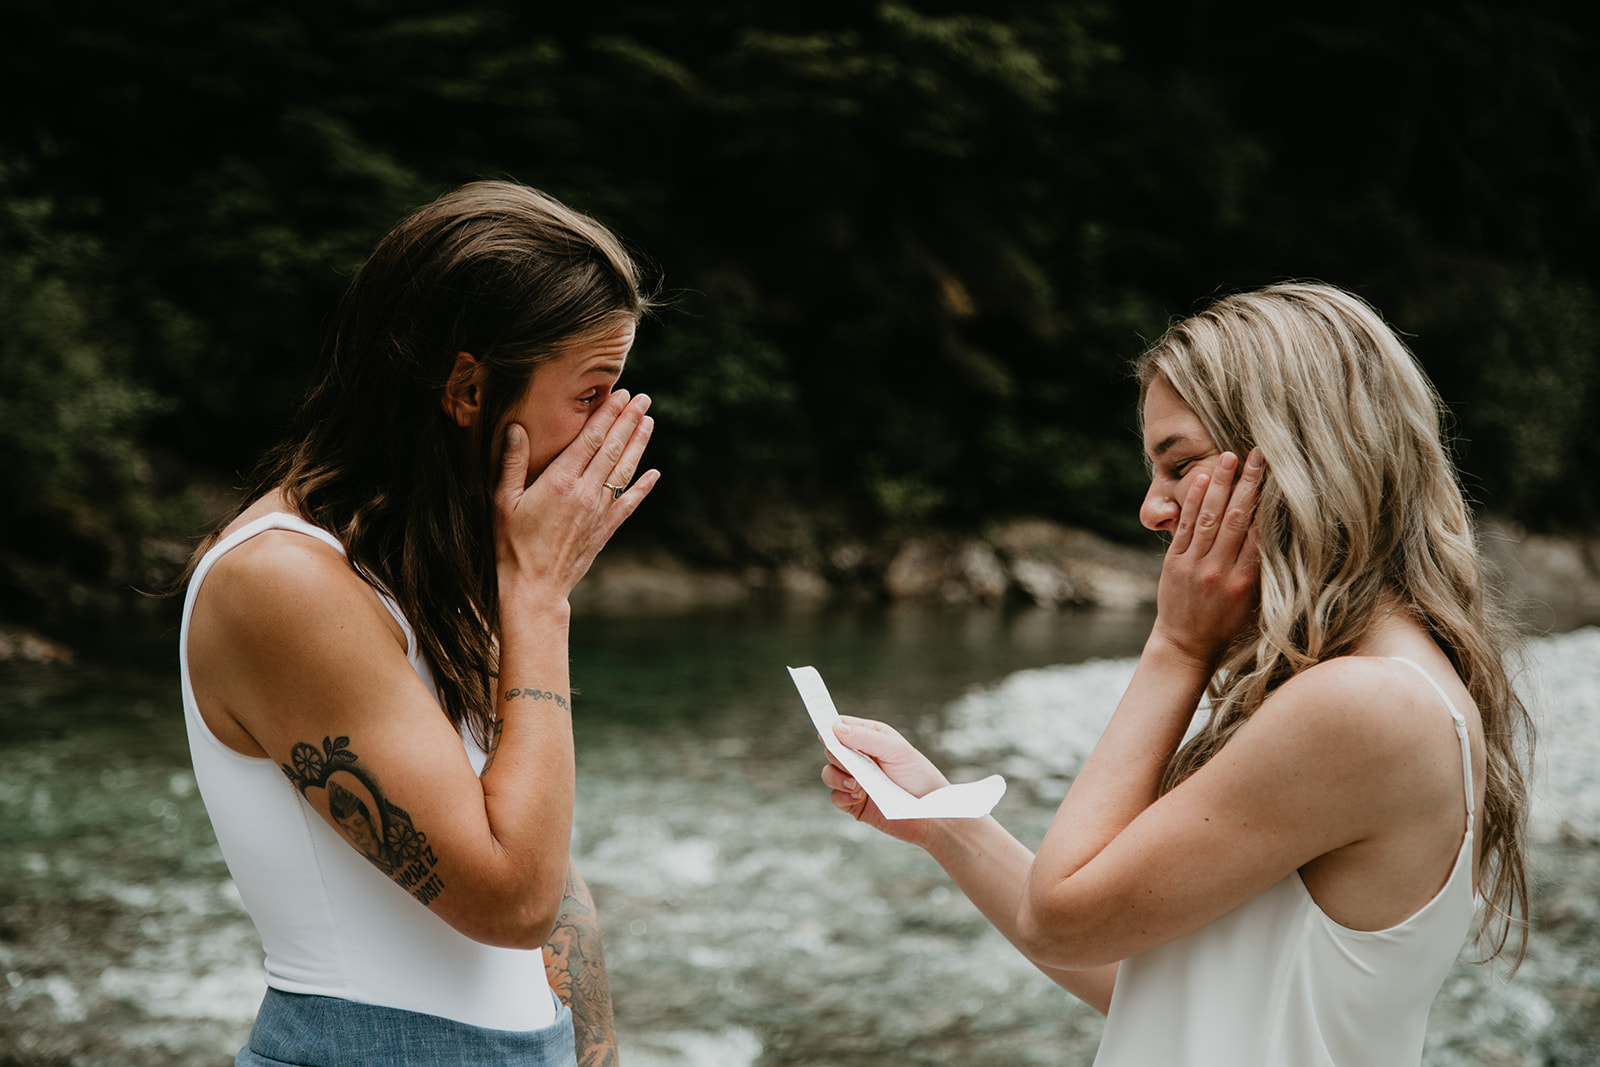 personal wedding vows, young hip and married vancouver elopement